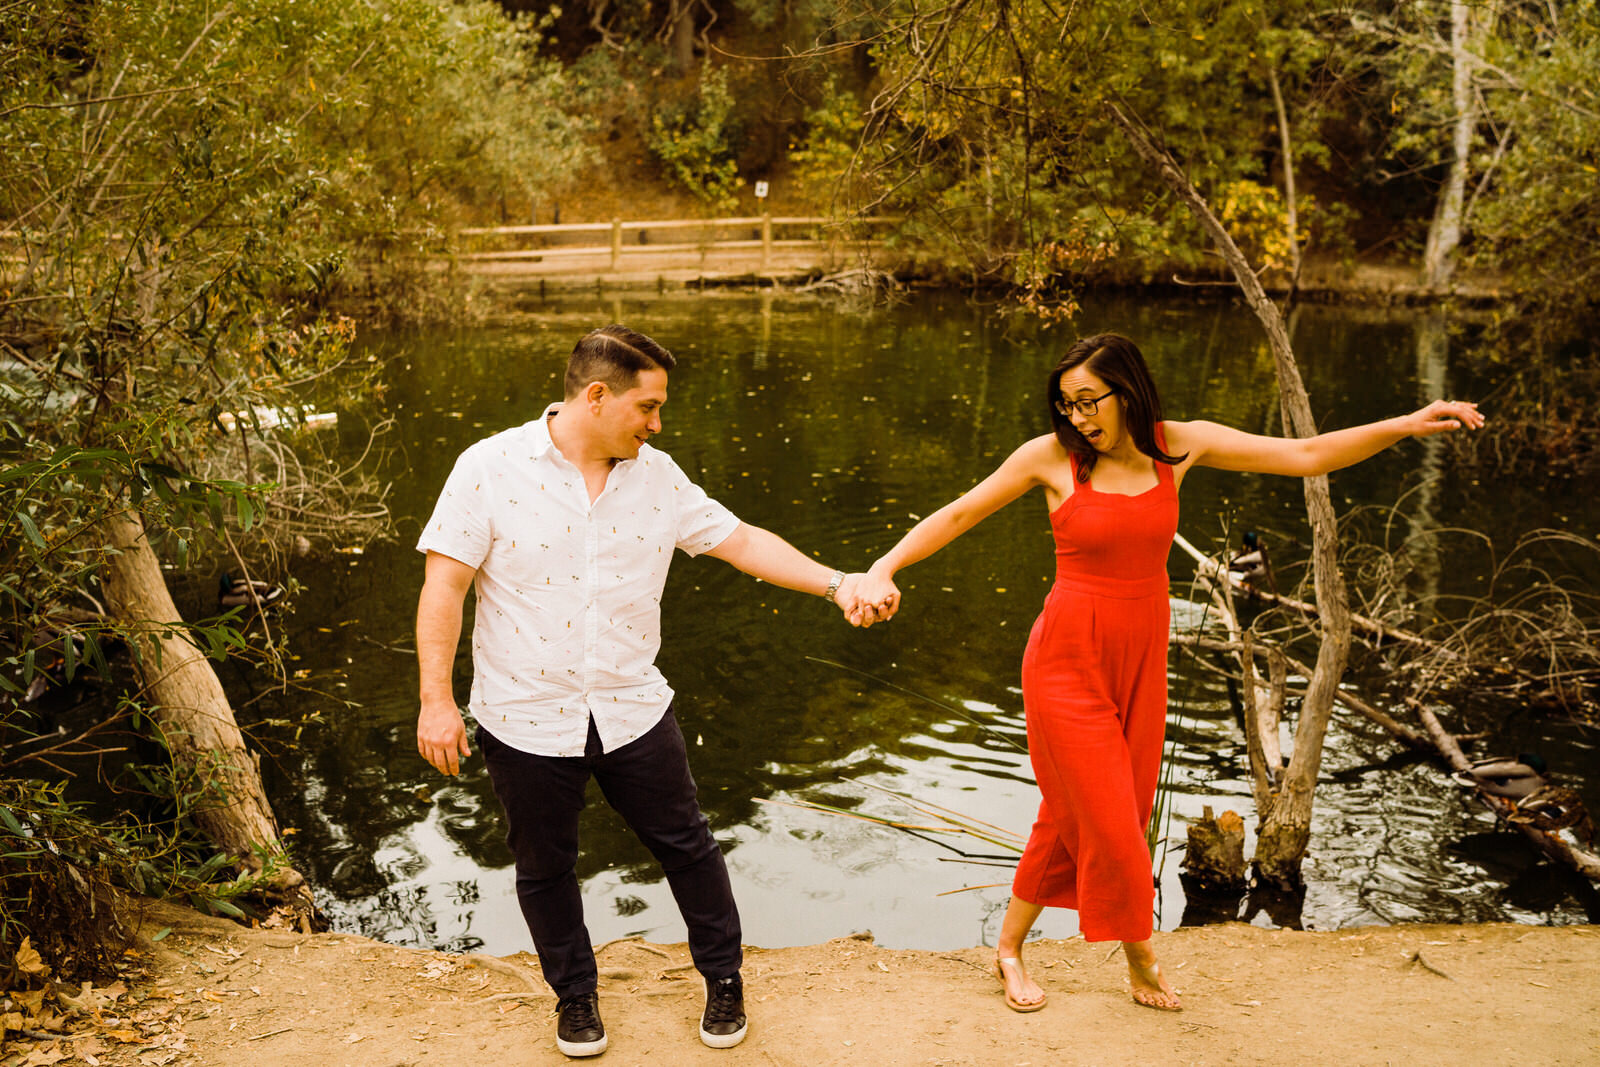 Engagement photo outfit ideas for Los Angeles